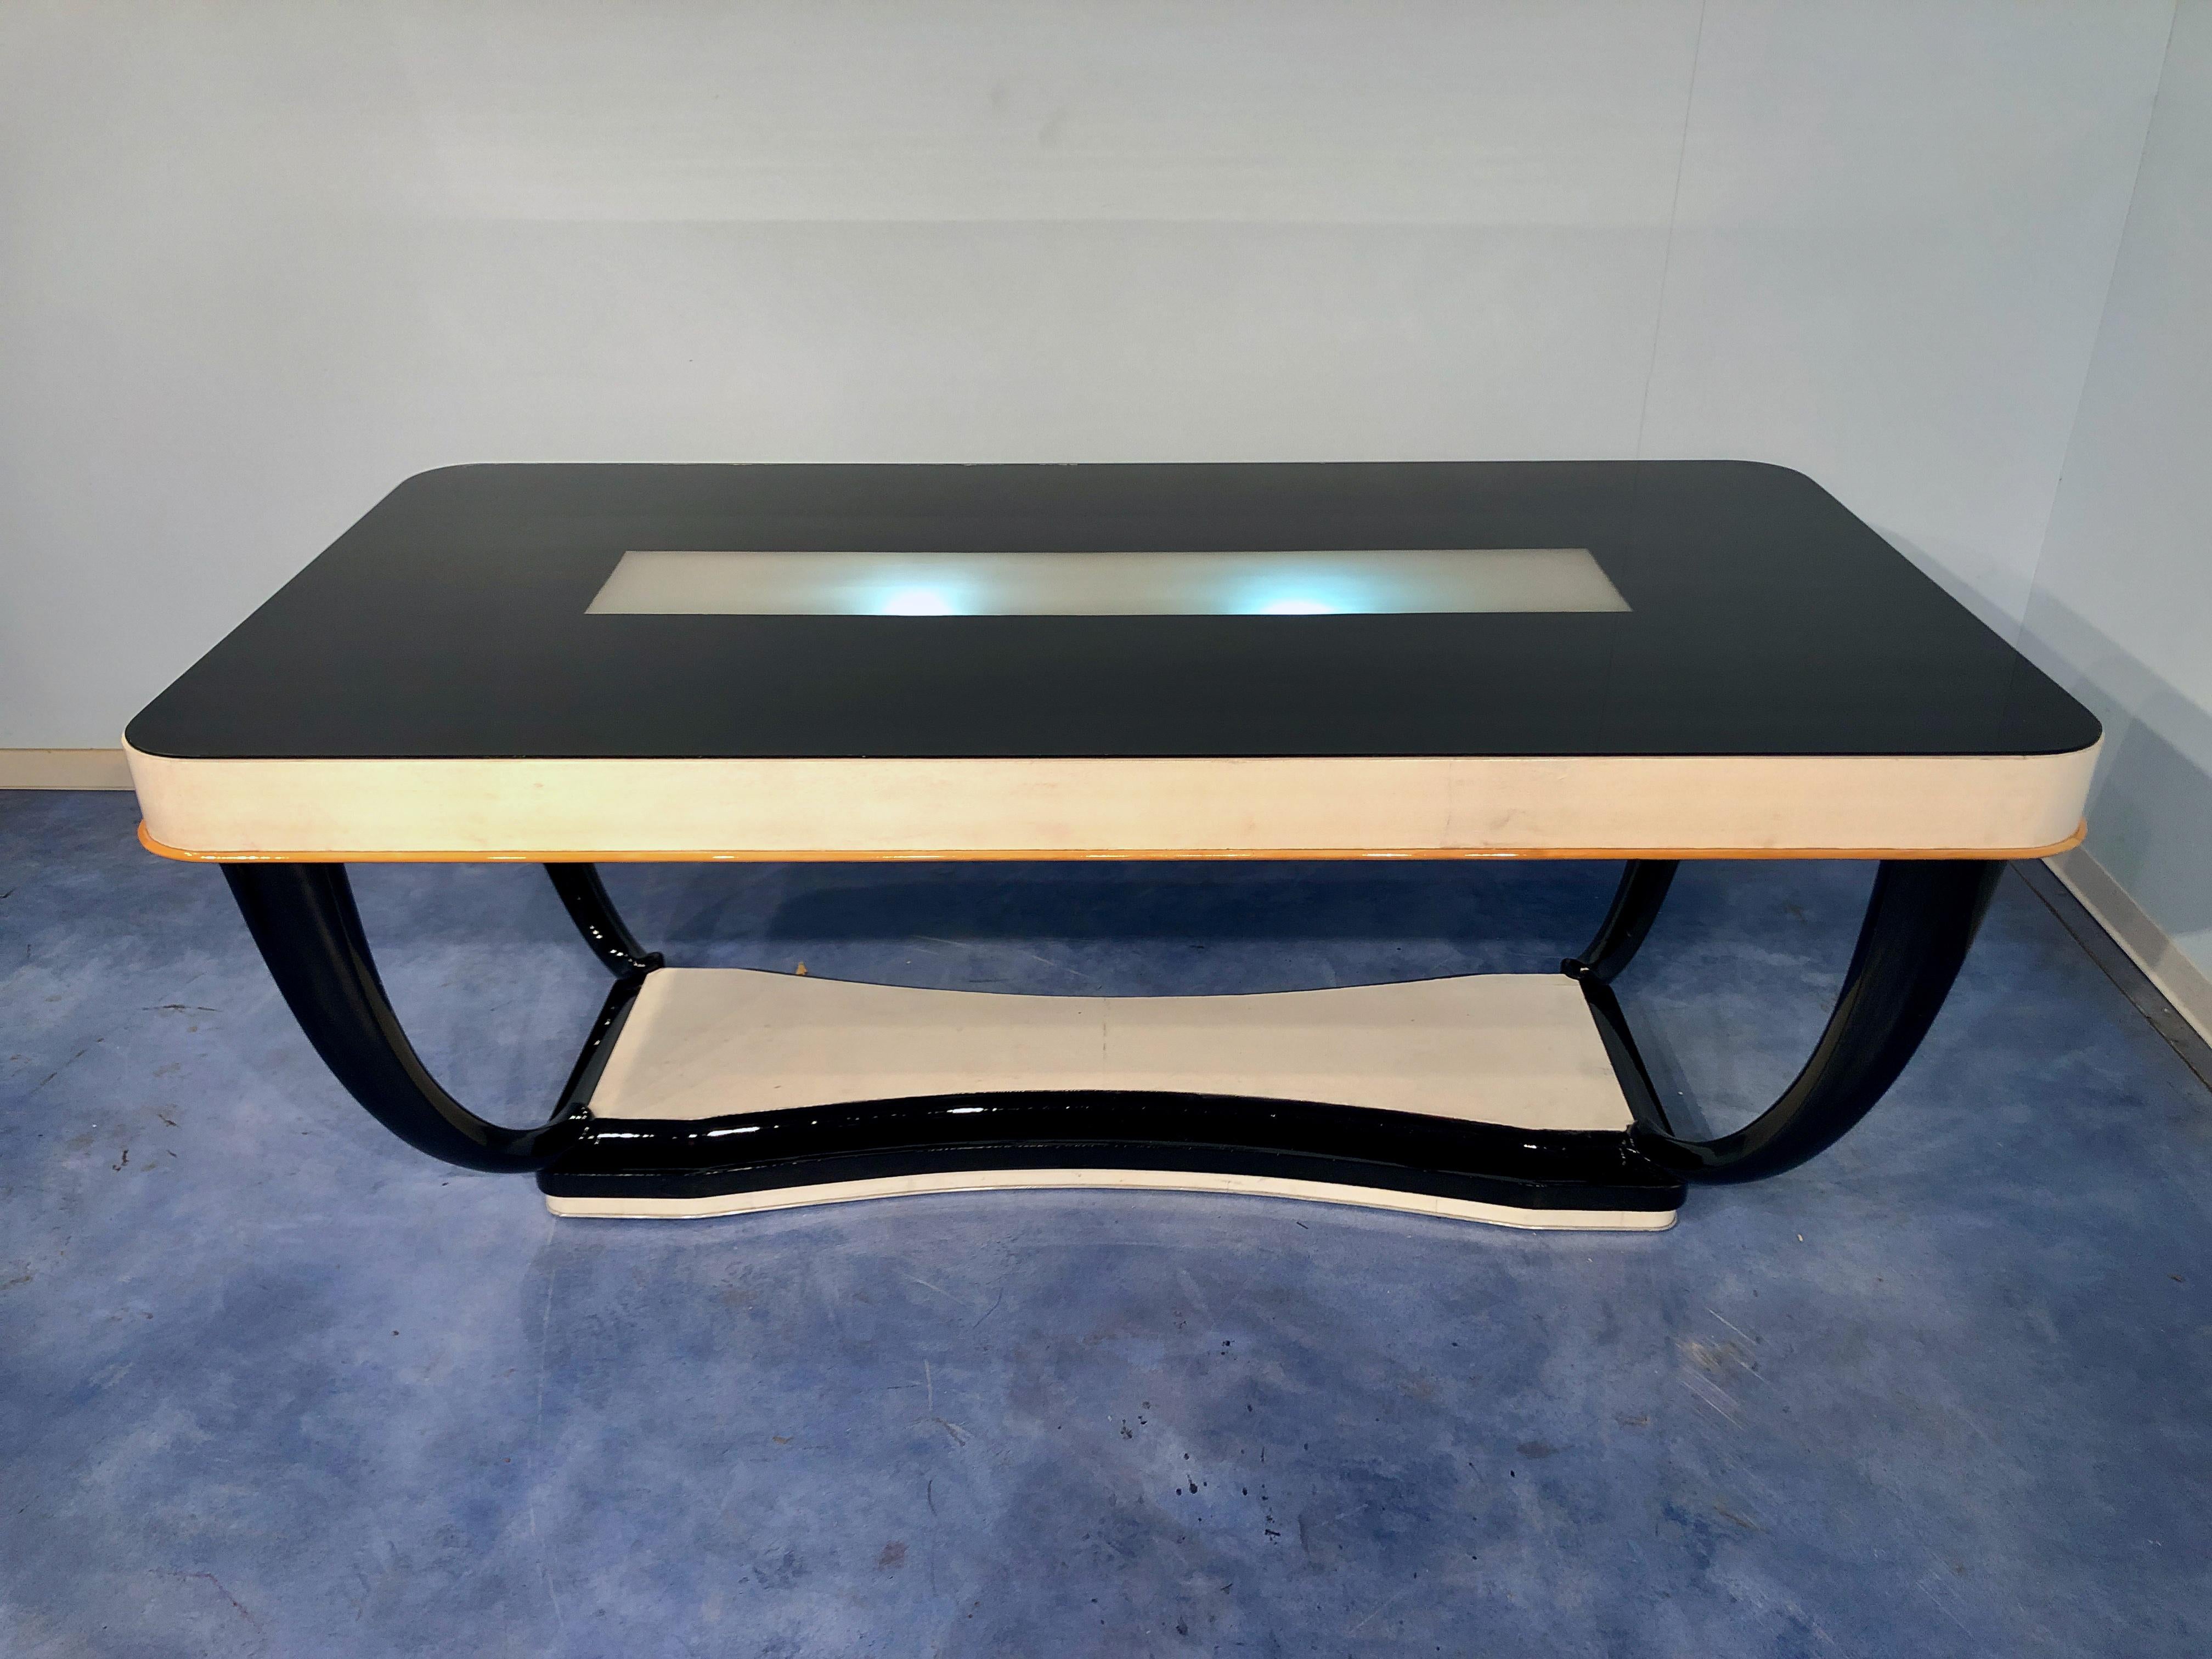 Luxurious and stylish Italian midcentury parchment dining table with an illuminated black glass top. The table legs are really elegant in black lacquered mahogany wood. The tableside is in parchment, you can notice a maple line on the final part.